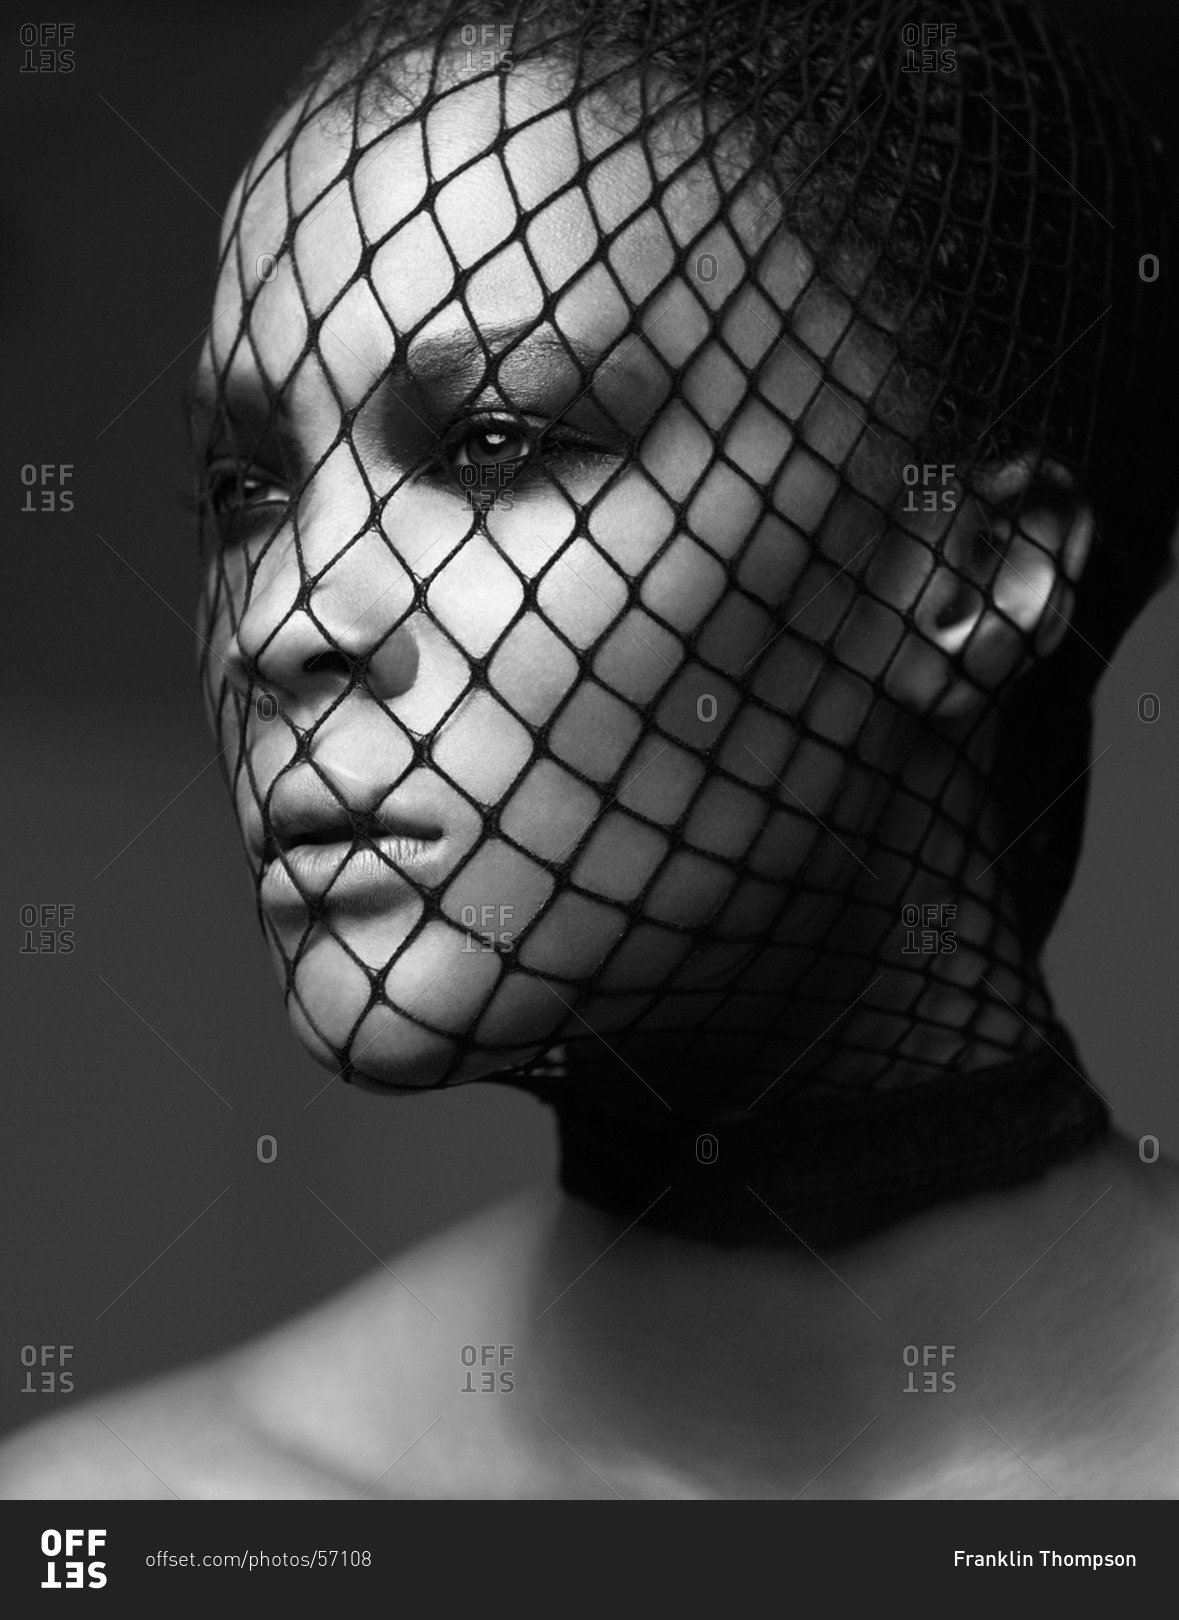 Head shot of dark-haired model with face net